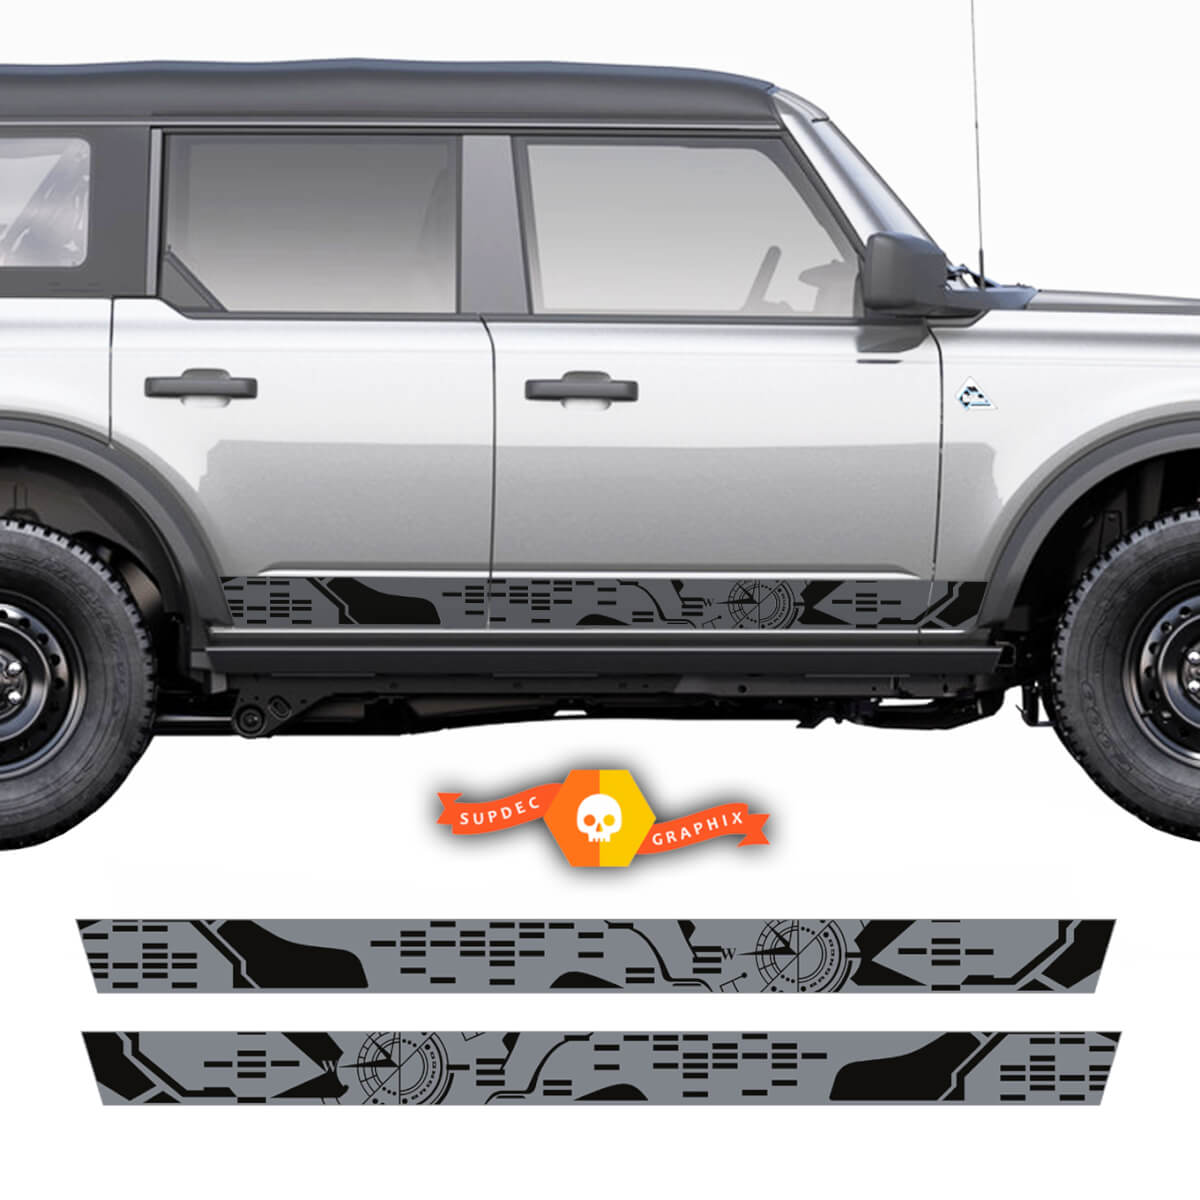 Side Bronco Compass Wrap Graphics Decal Sticker voor Ford Bronco
